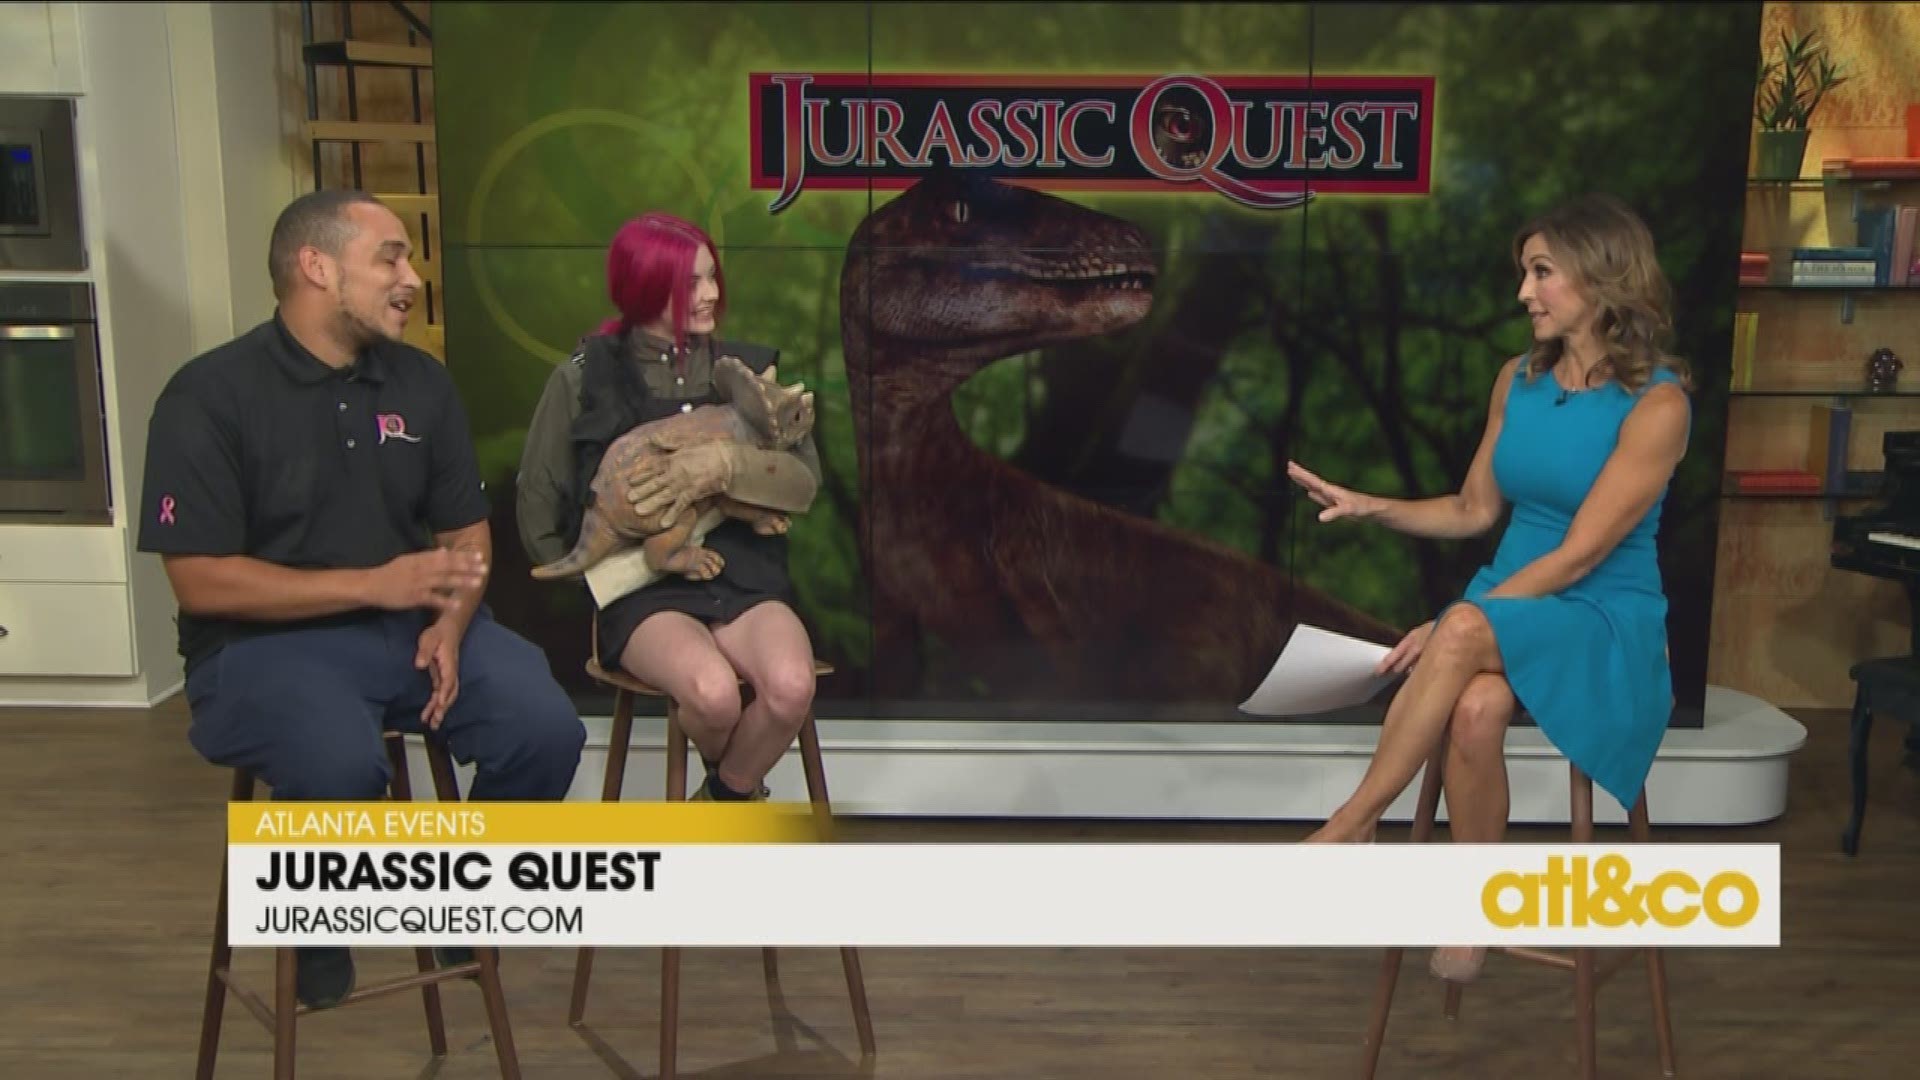 Prehistoric perfection! Jurassic Quest kicks off this weekend at the Georgia World Congress Center.